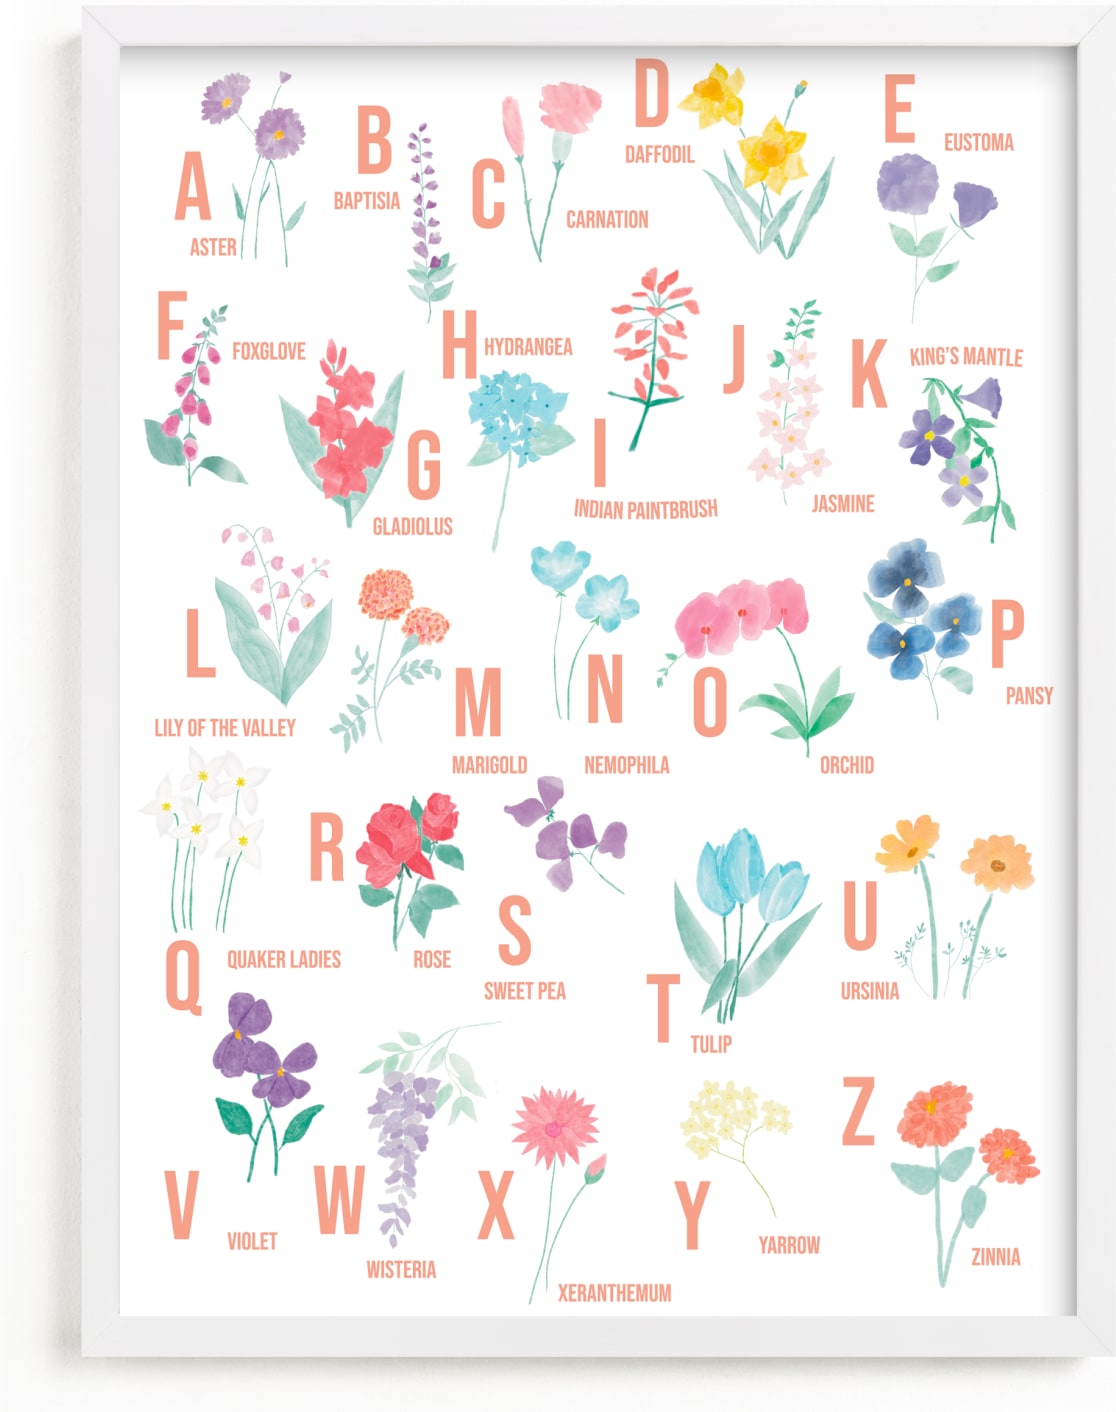 This is a colorful art by Jessica Kelemen called Flower Alphabet.